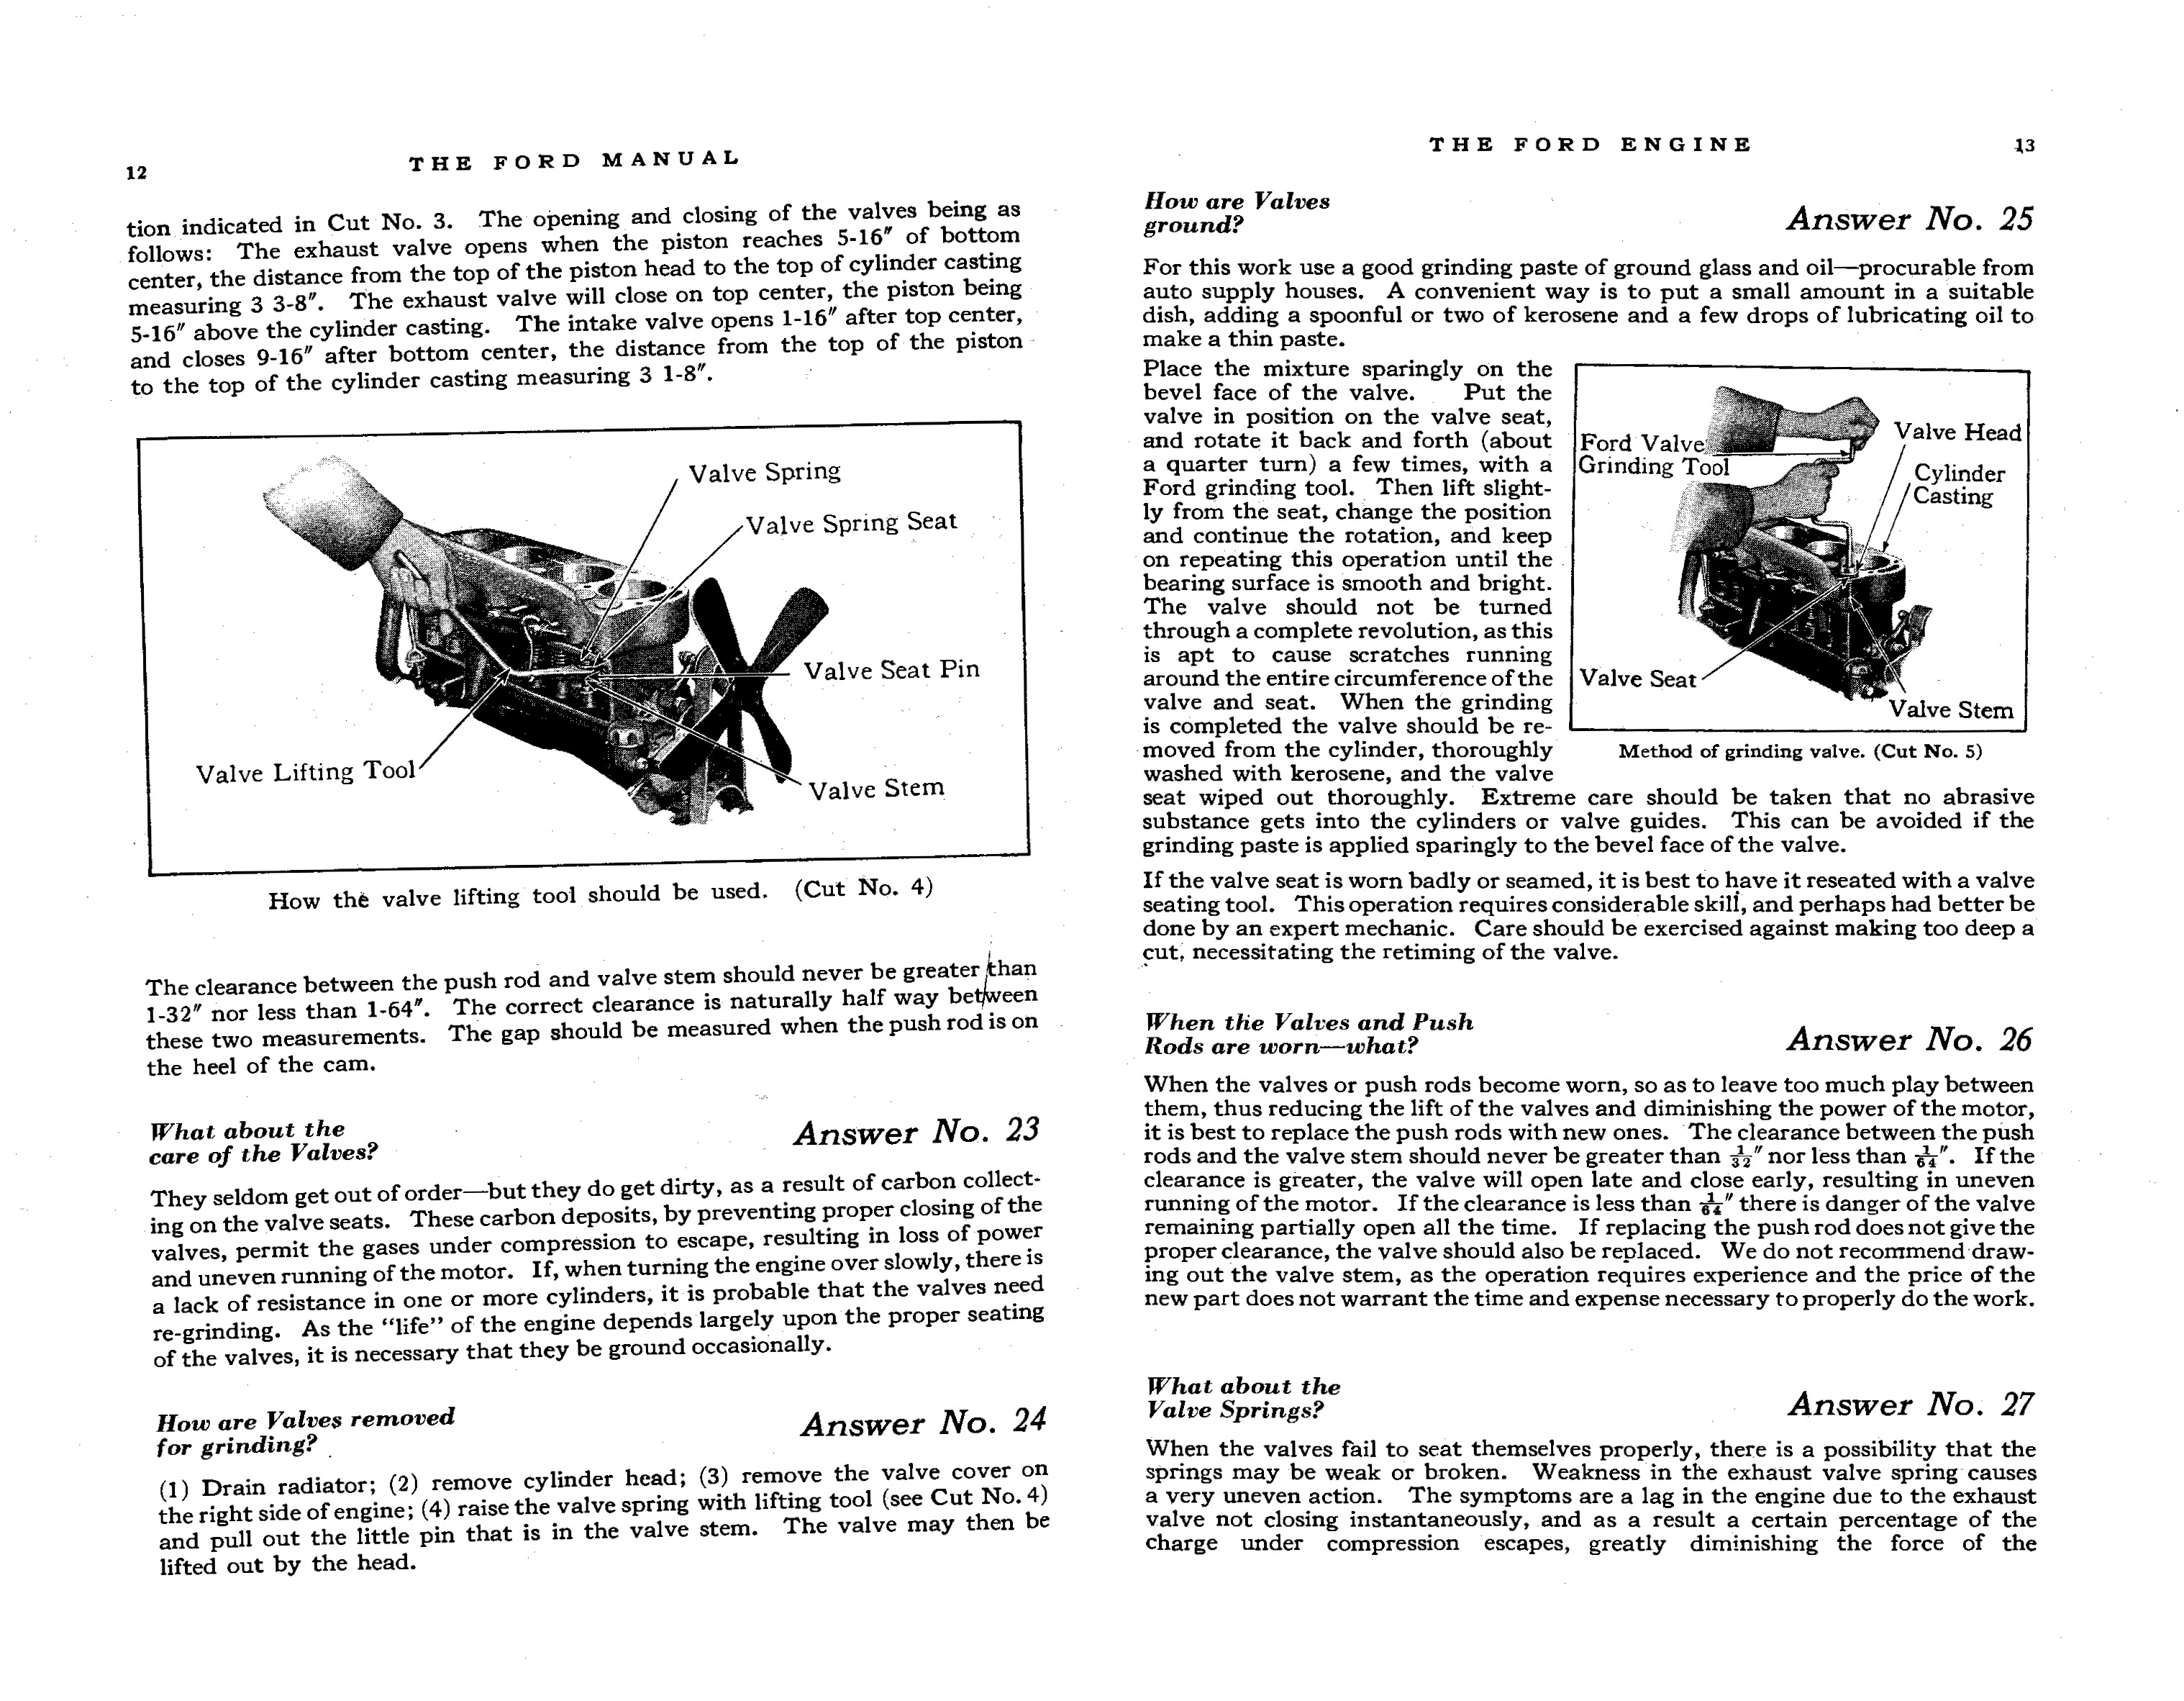 1925_Ford_Owners_Manual-12-13